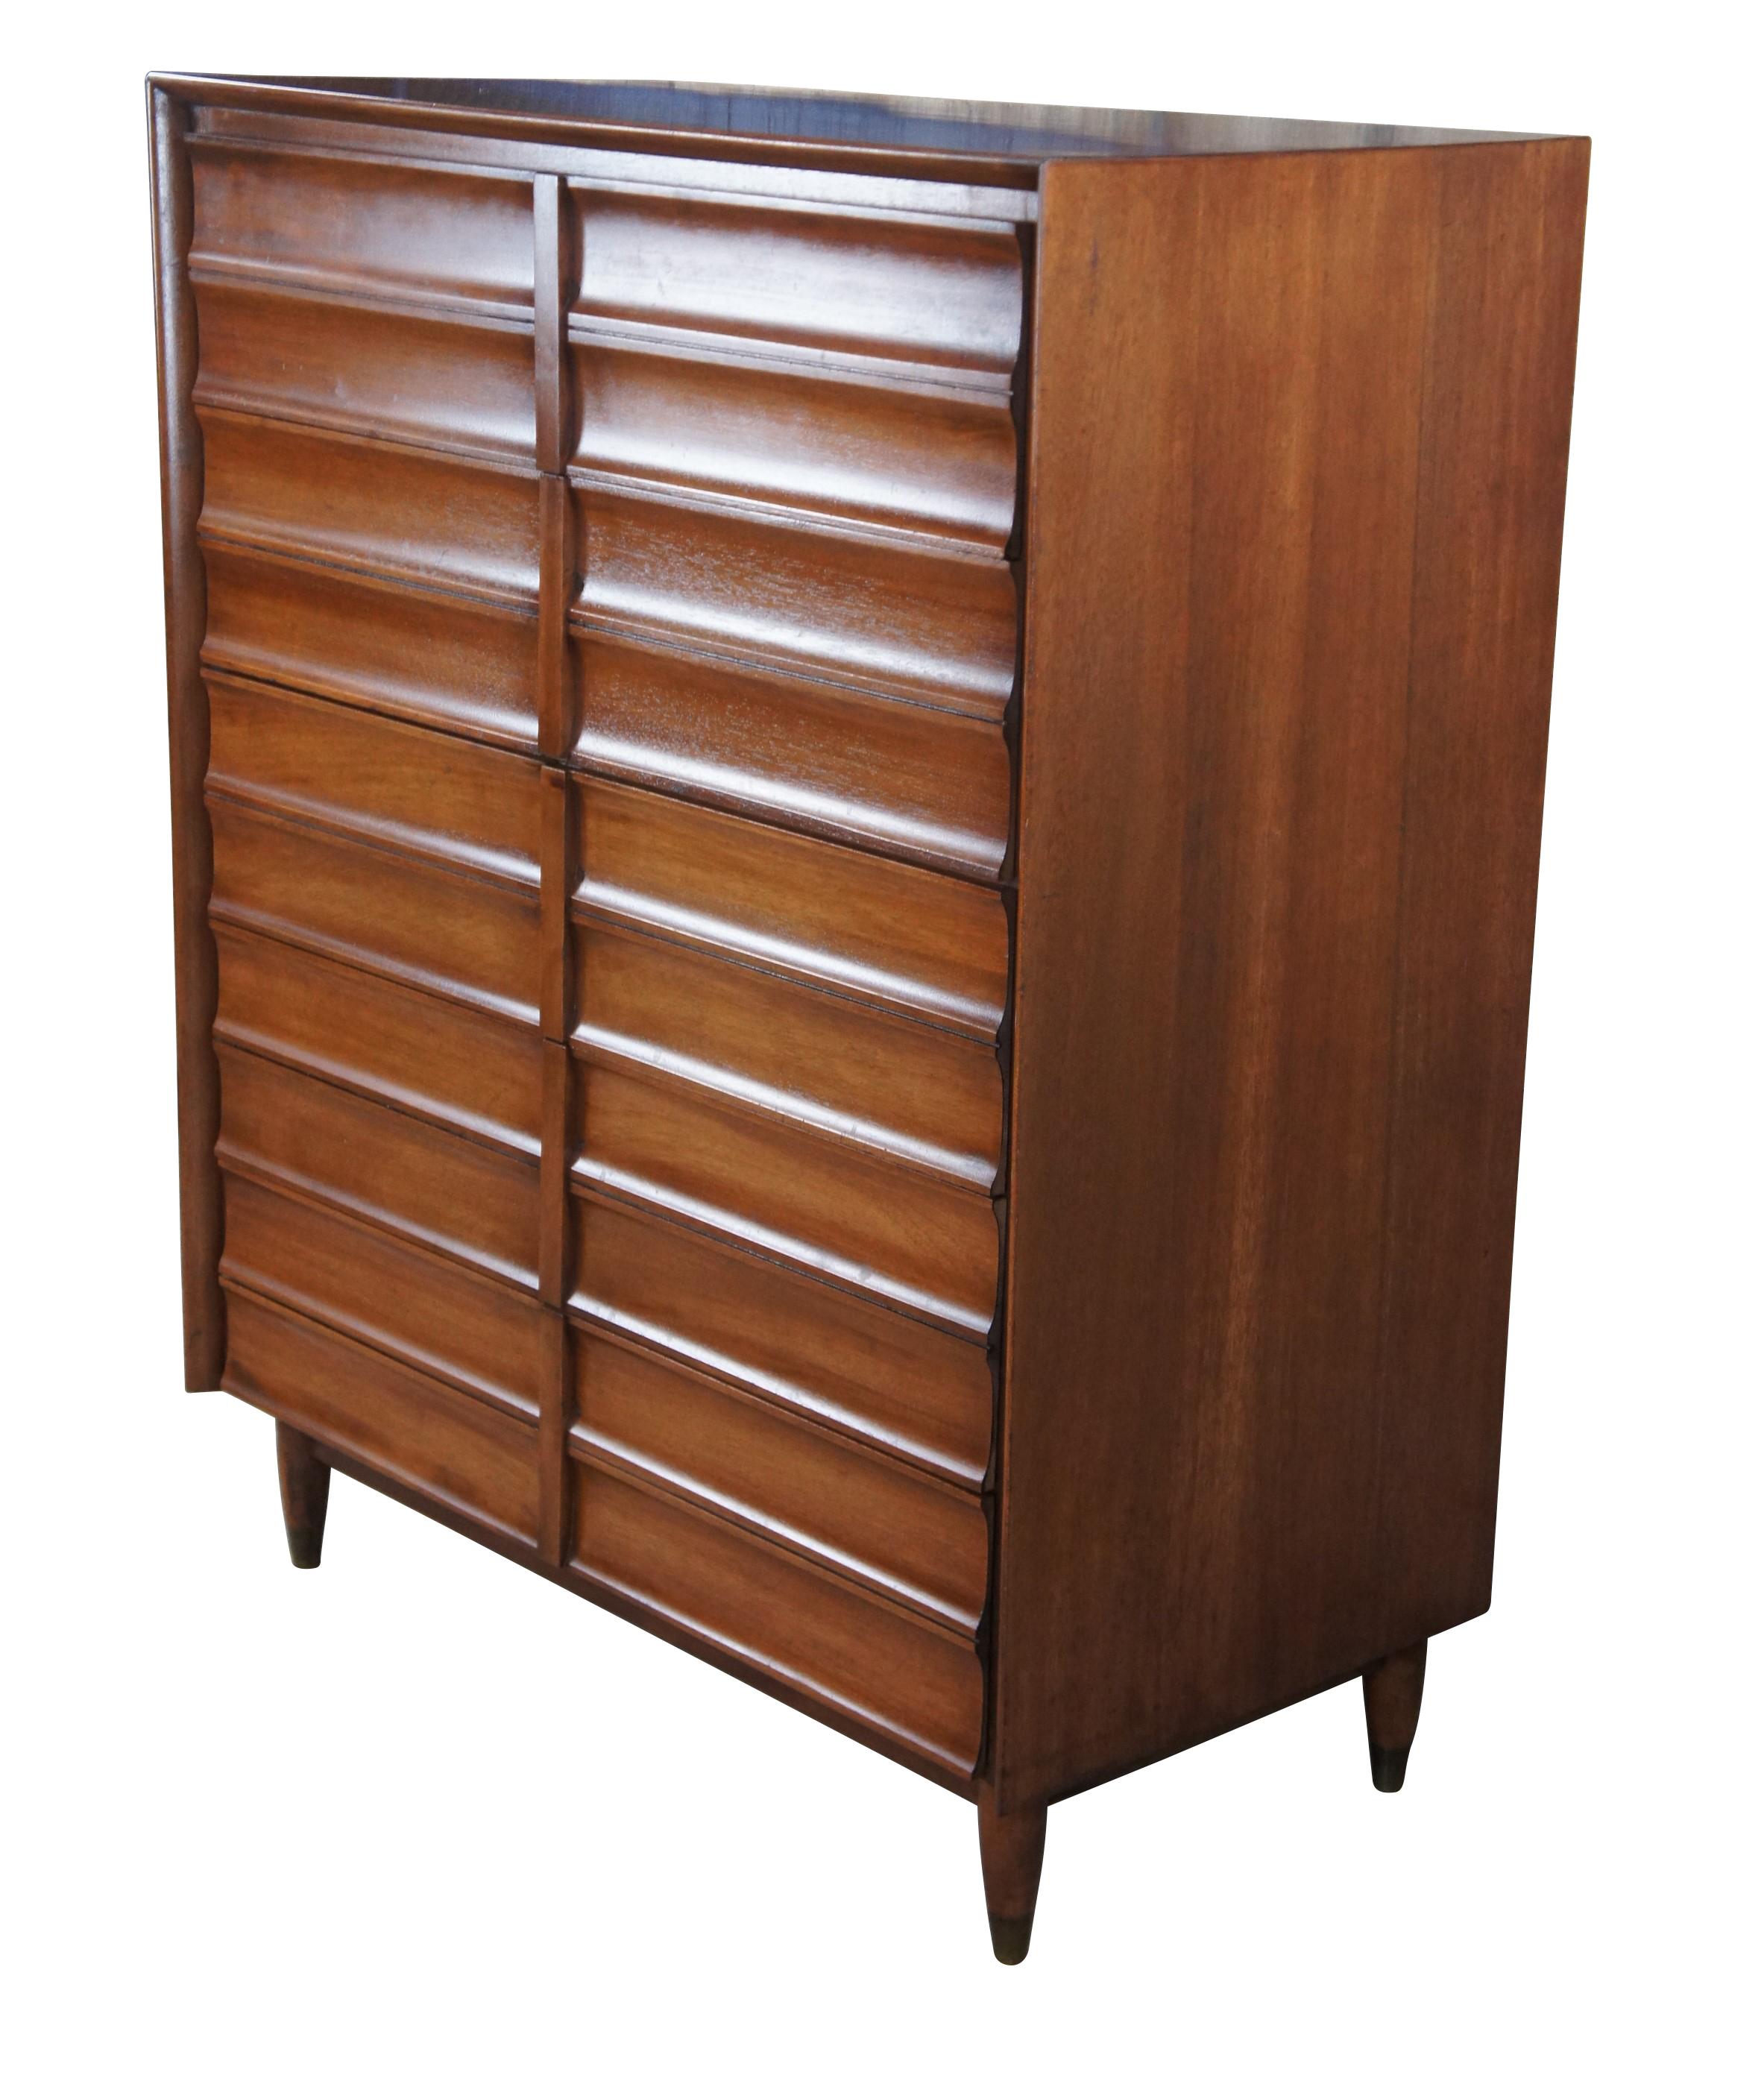 Mid Century Modern Hungerford of Memphis dresser or tall chest of drawers.  Made of mahogany featuring five drawers and brass capped feet.  8706 Five Drawer Chest, Royal Pastel.

Hungerford Furniture was known for choosing Elvis to be the focus